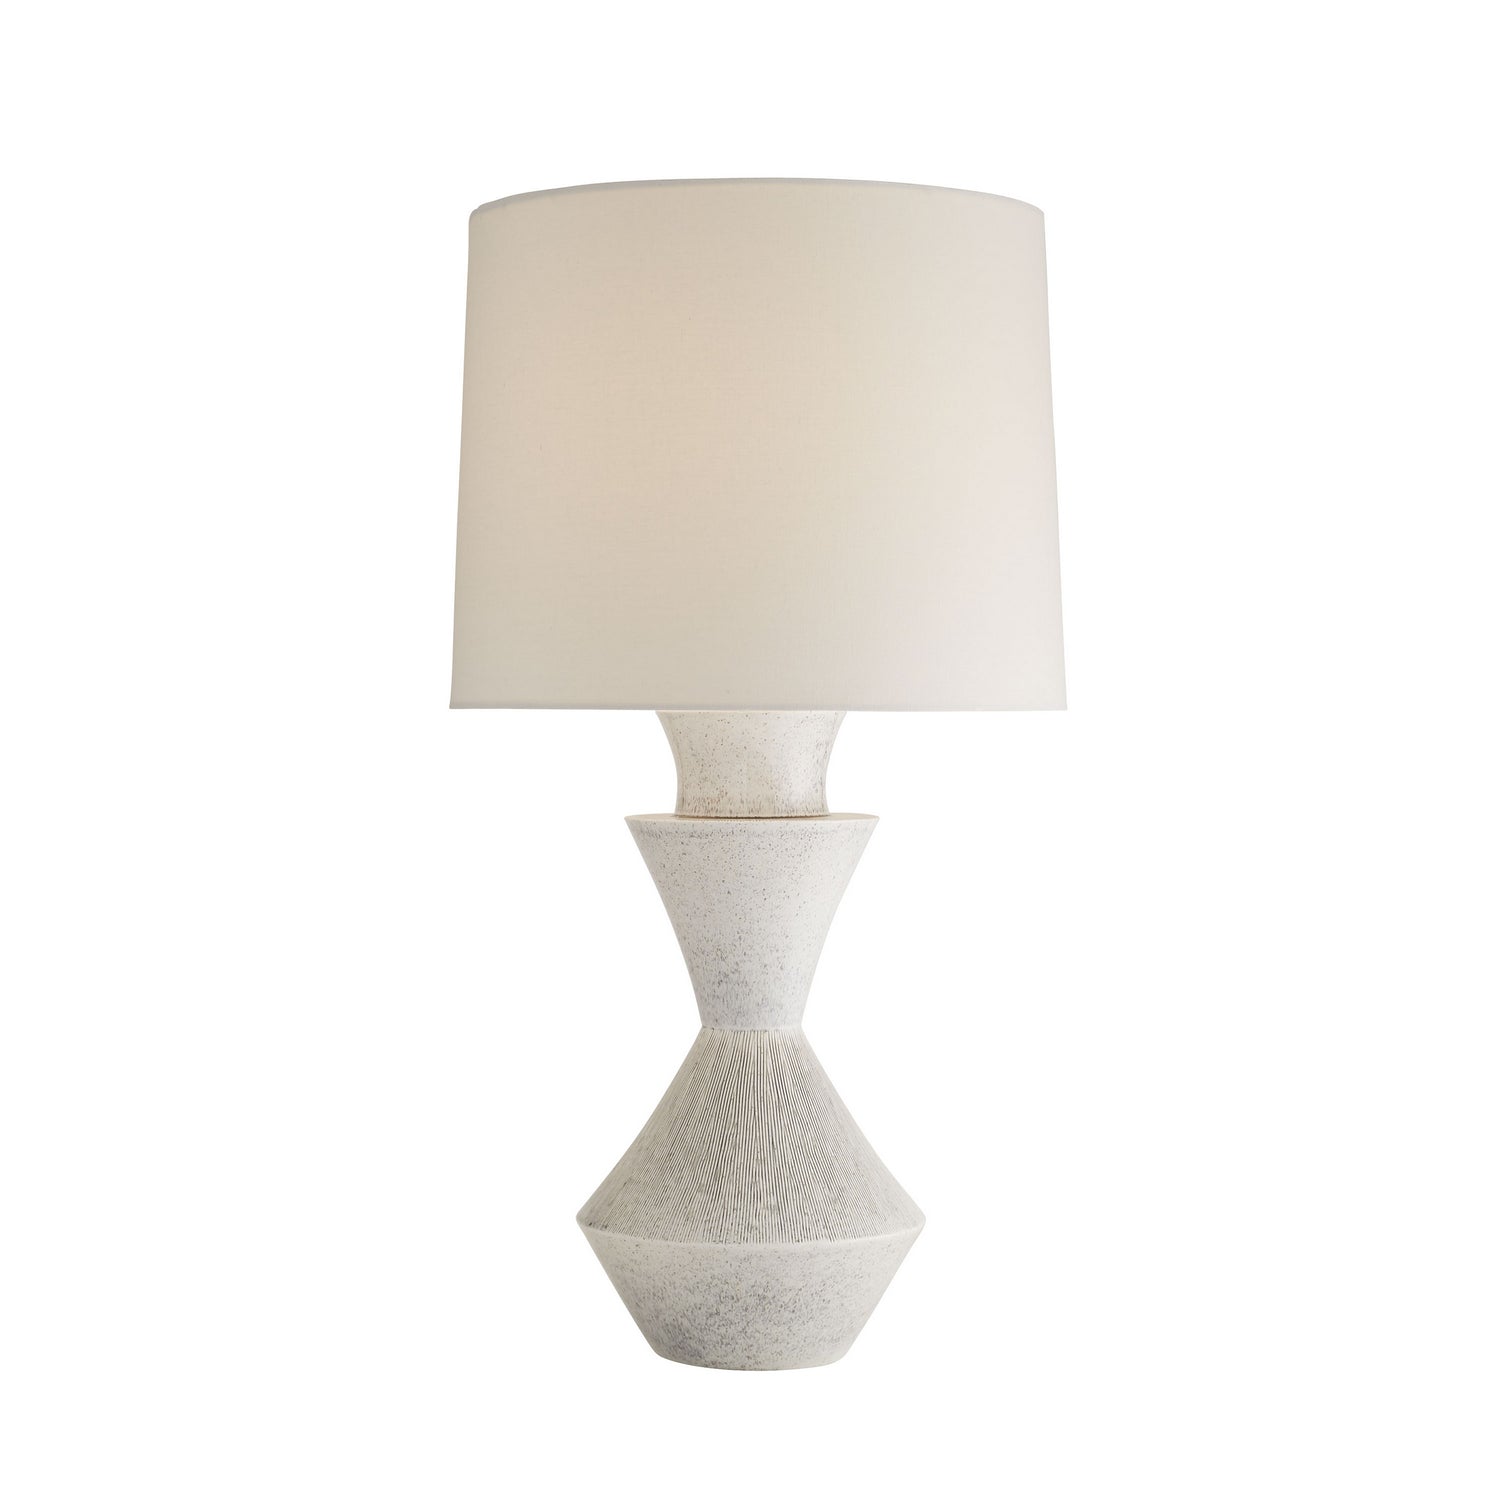 One Light Table Lamp from the Dottie collection in Ice Reactive finish